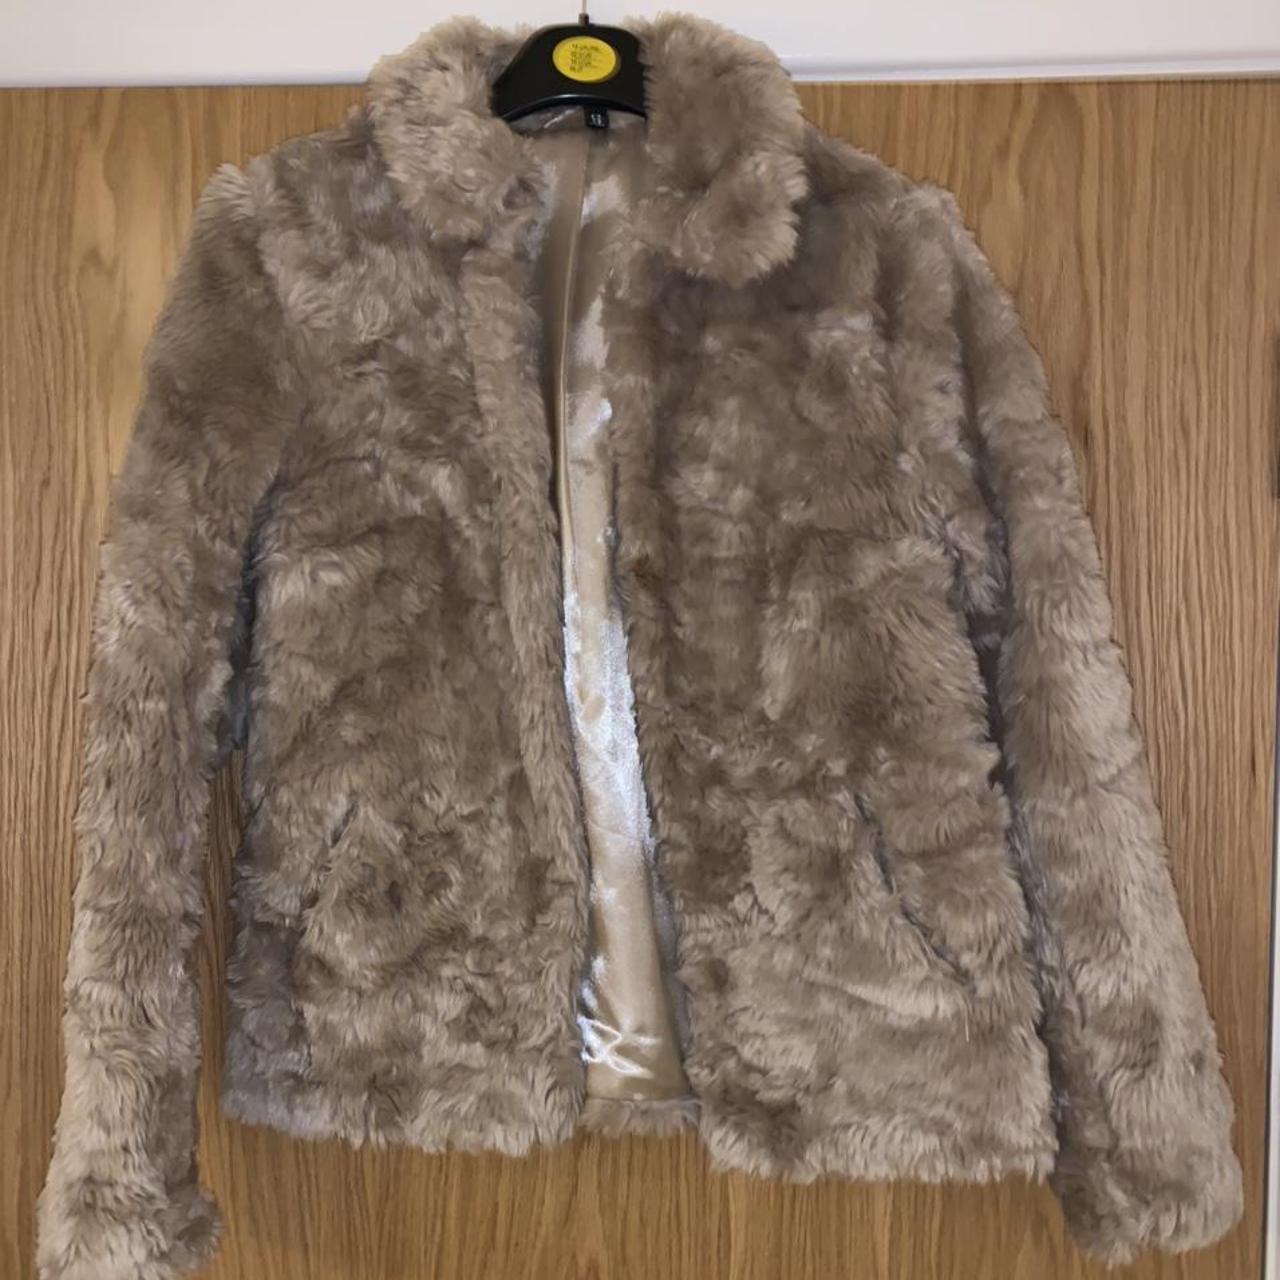 H&M Nude Fur Coat Good condition hardly been... - Depop